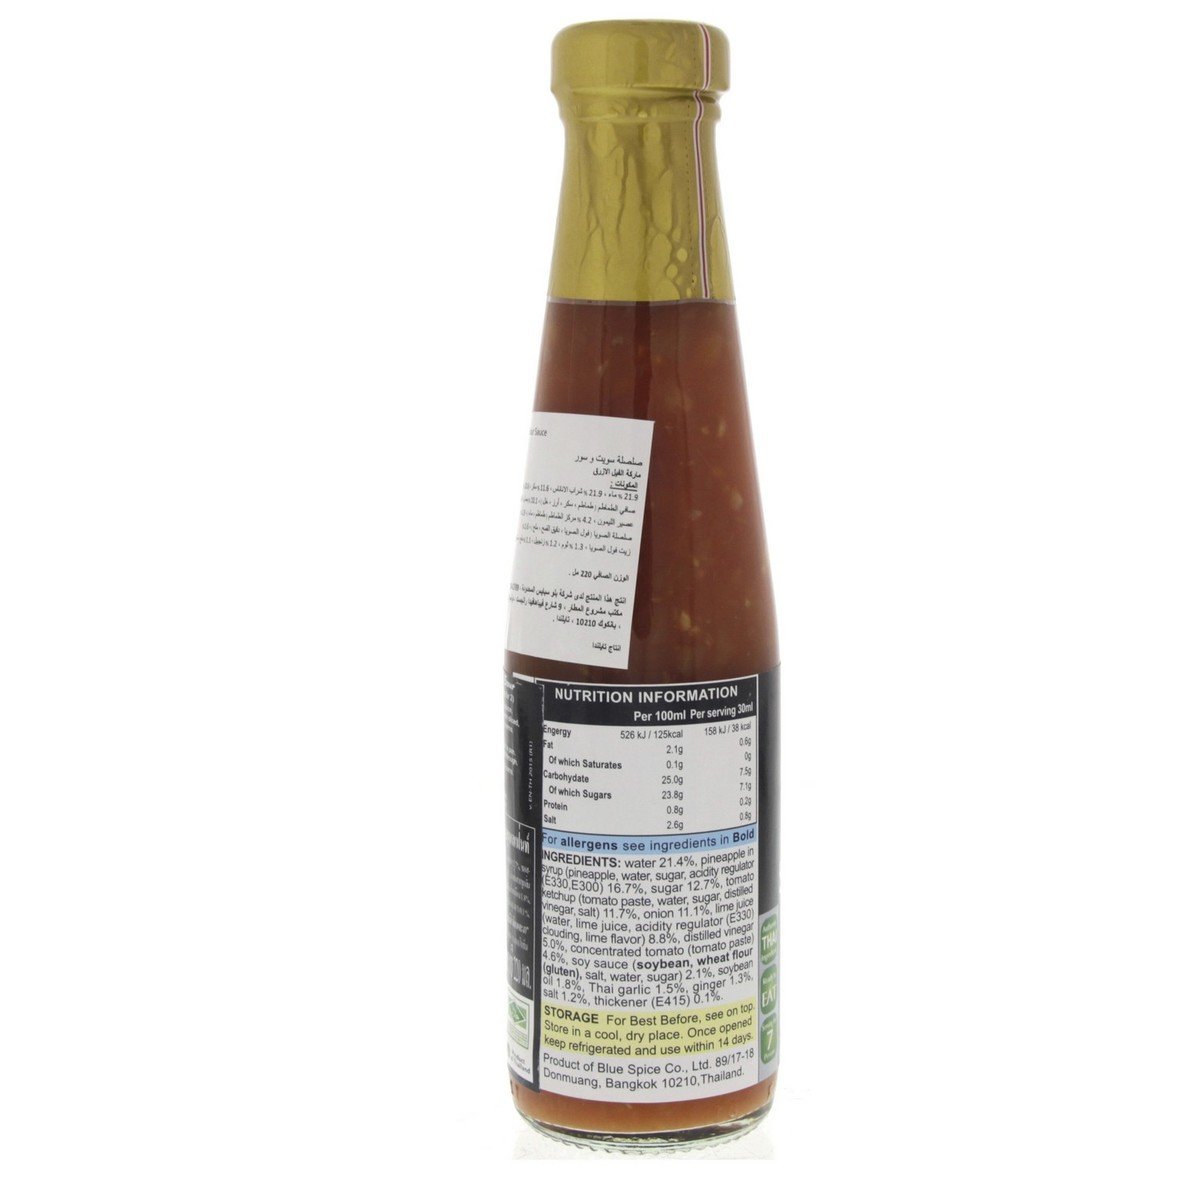 Blue Elephant Sweet And Sour Sauce 220 ml